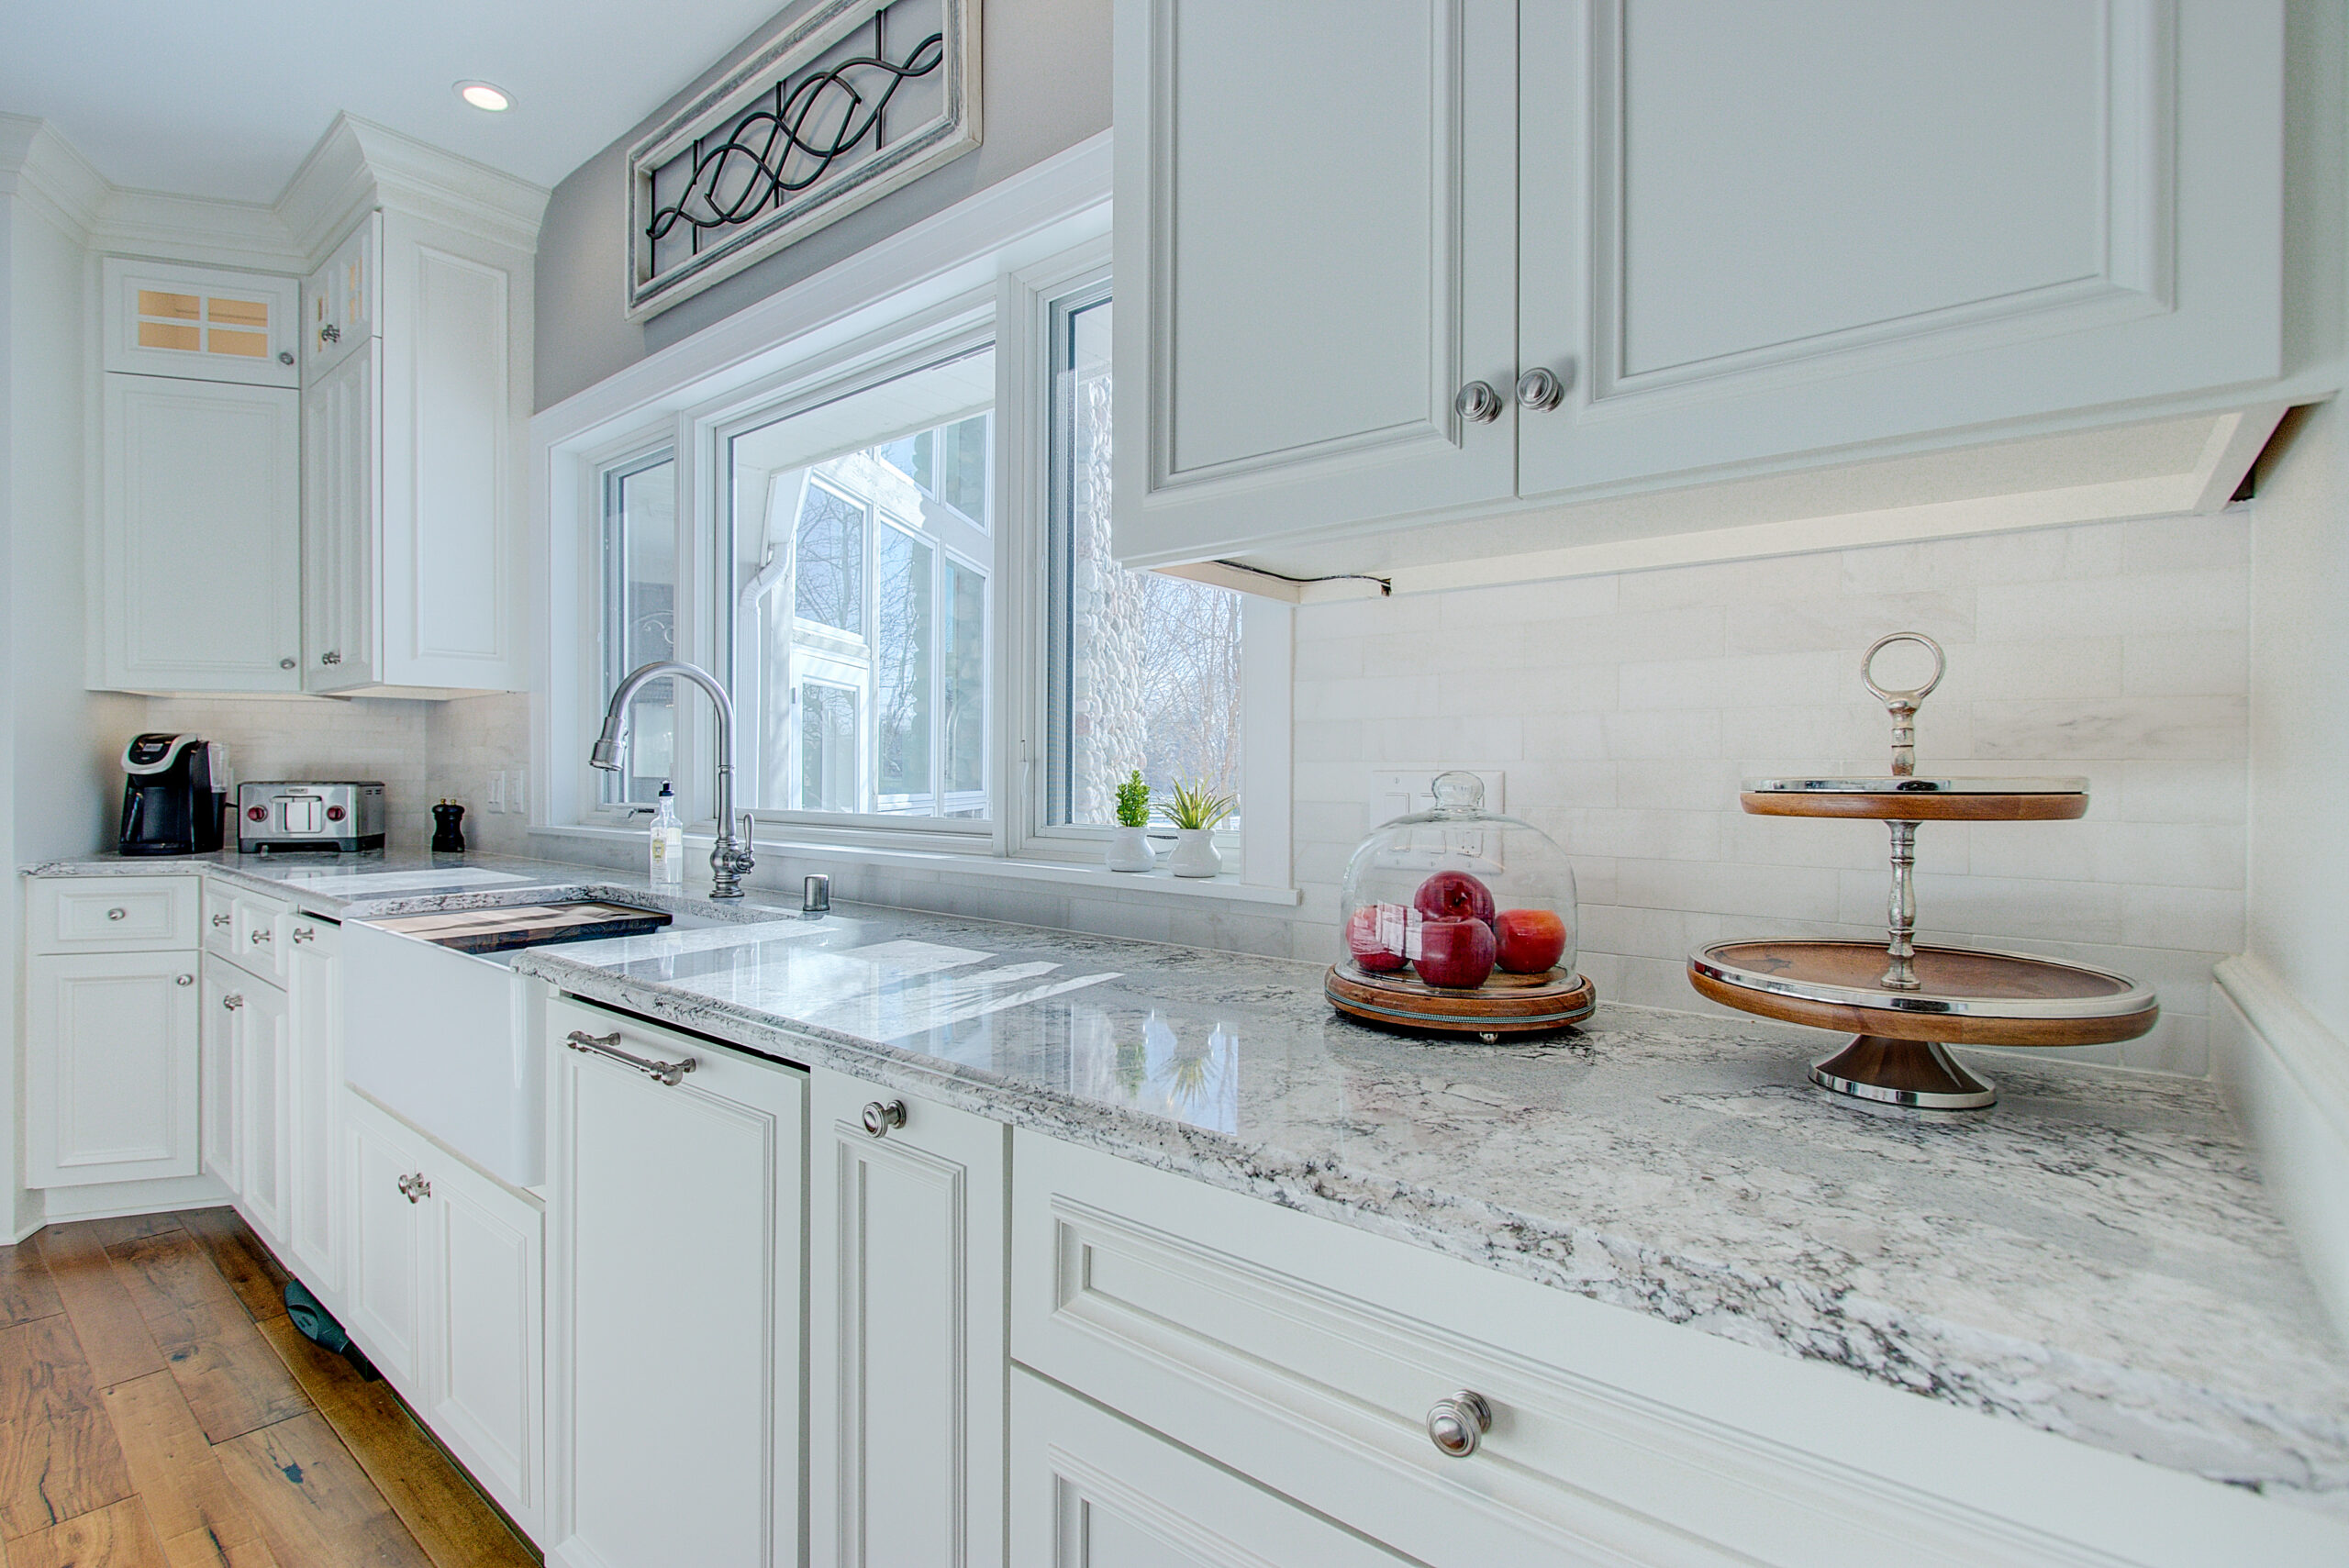 Custom kitchen cabinetry and countertops in WI home